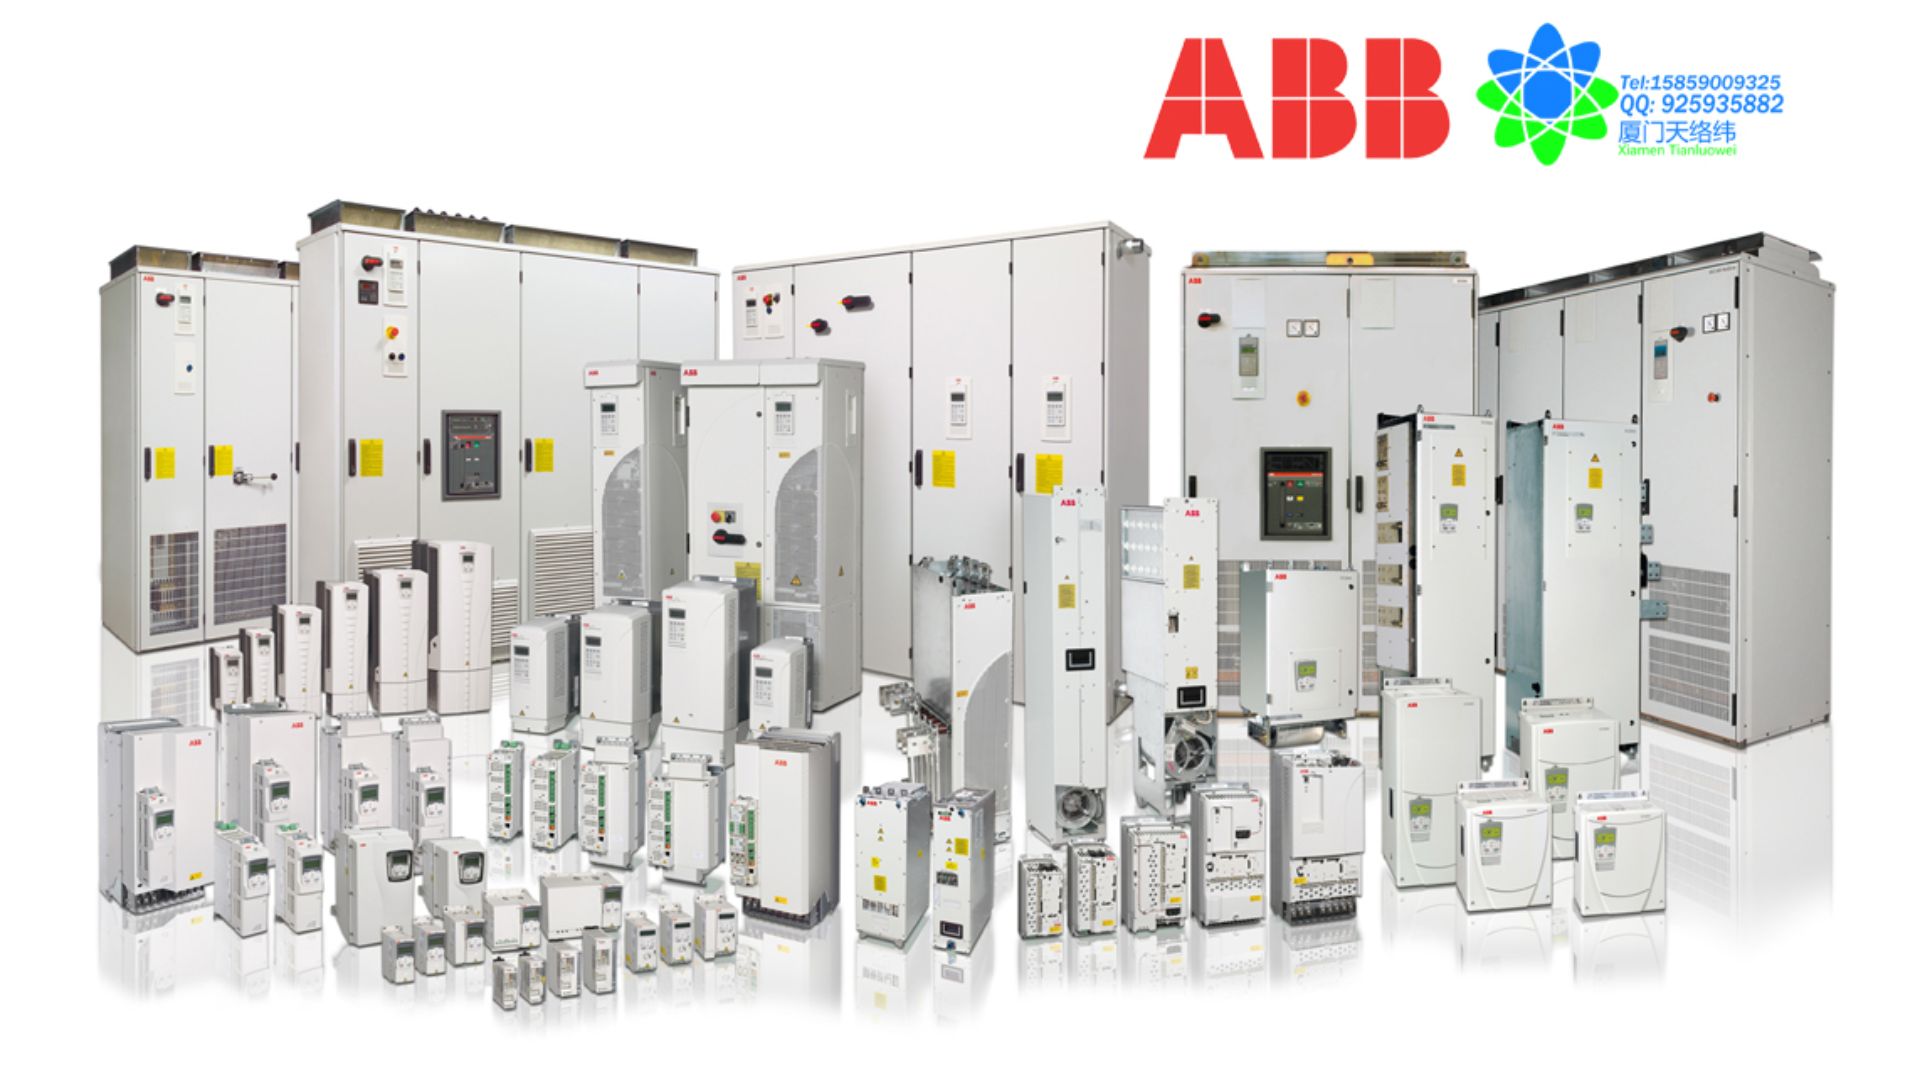 ABB Wiring Accessories Setting the Standard in Electrical Safety